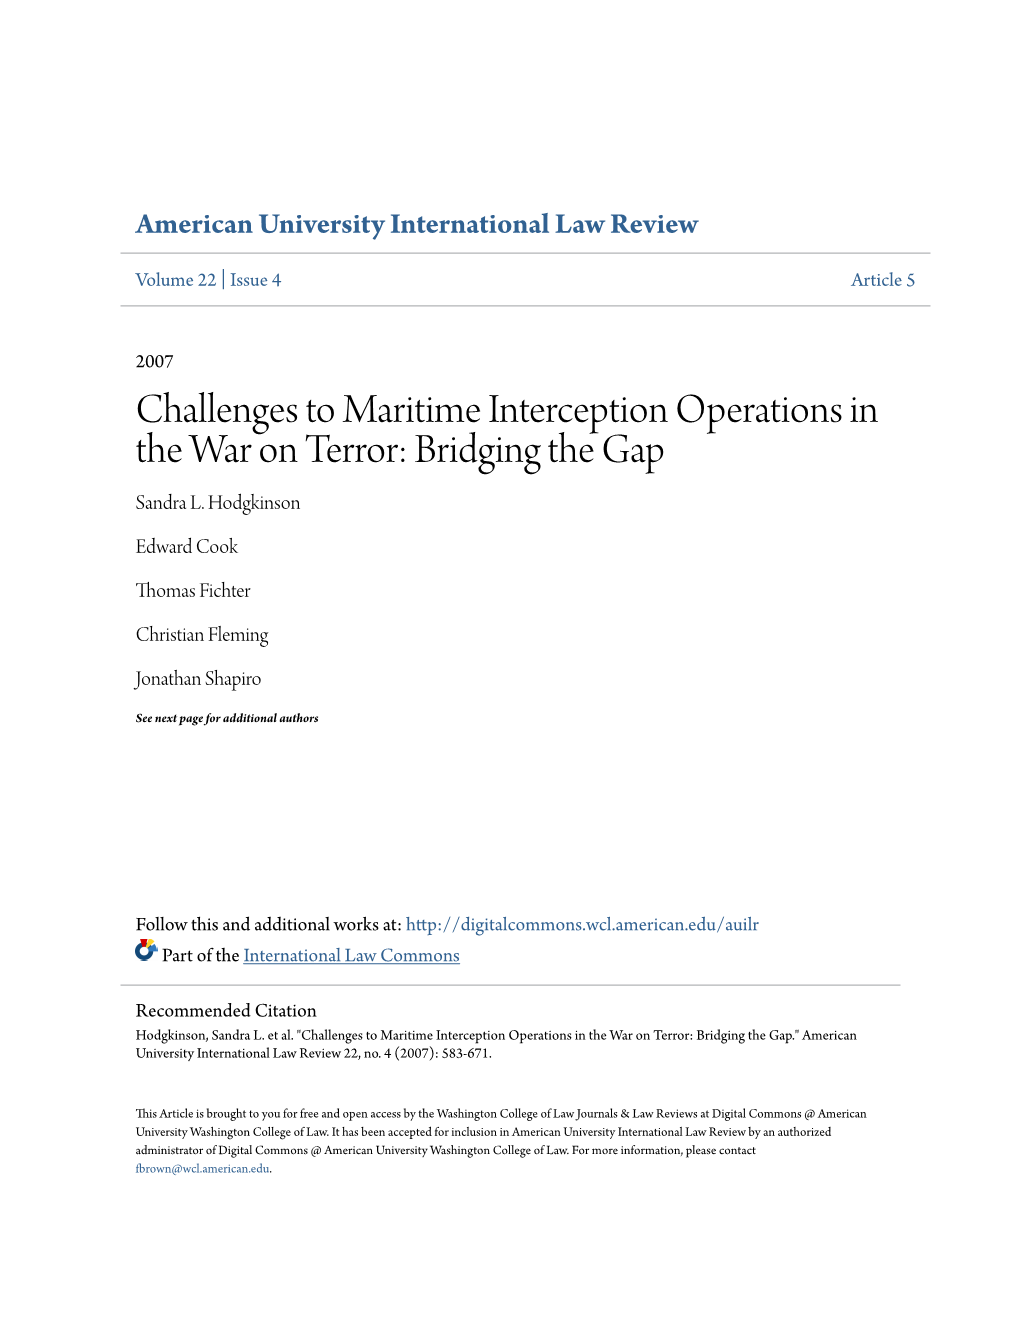 Challenges to Maritime Interception Operations in the War on Terror: Bridging the Gap Sandra L